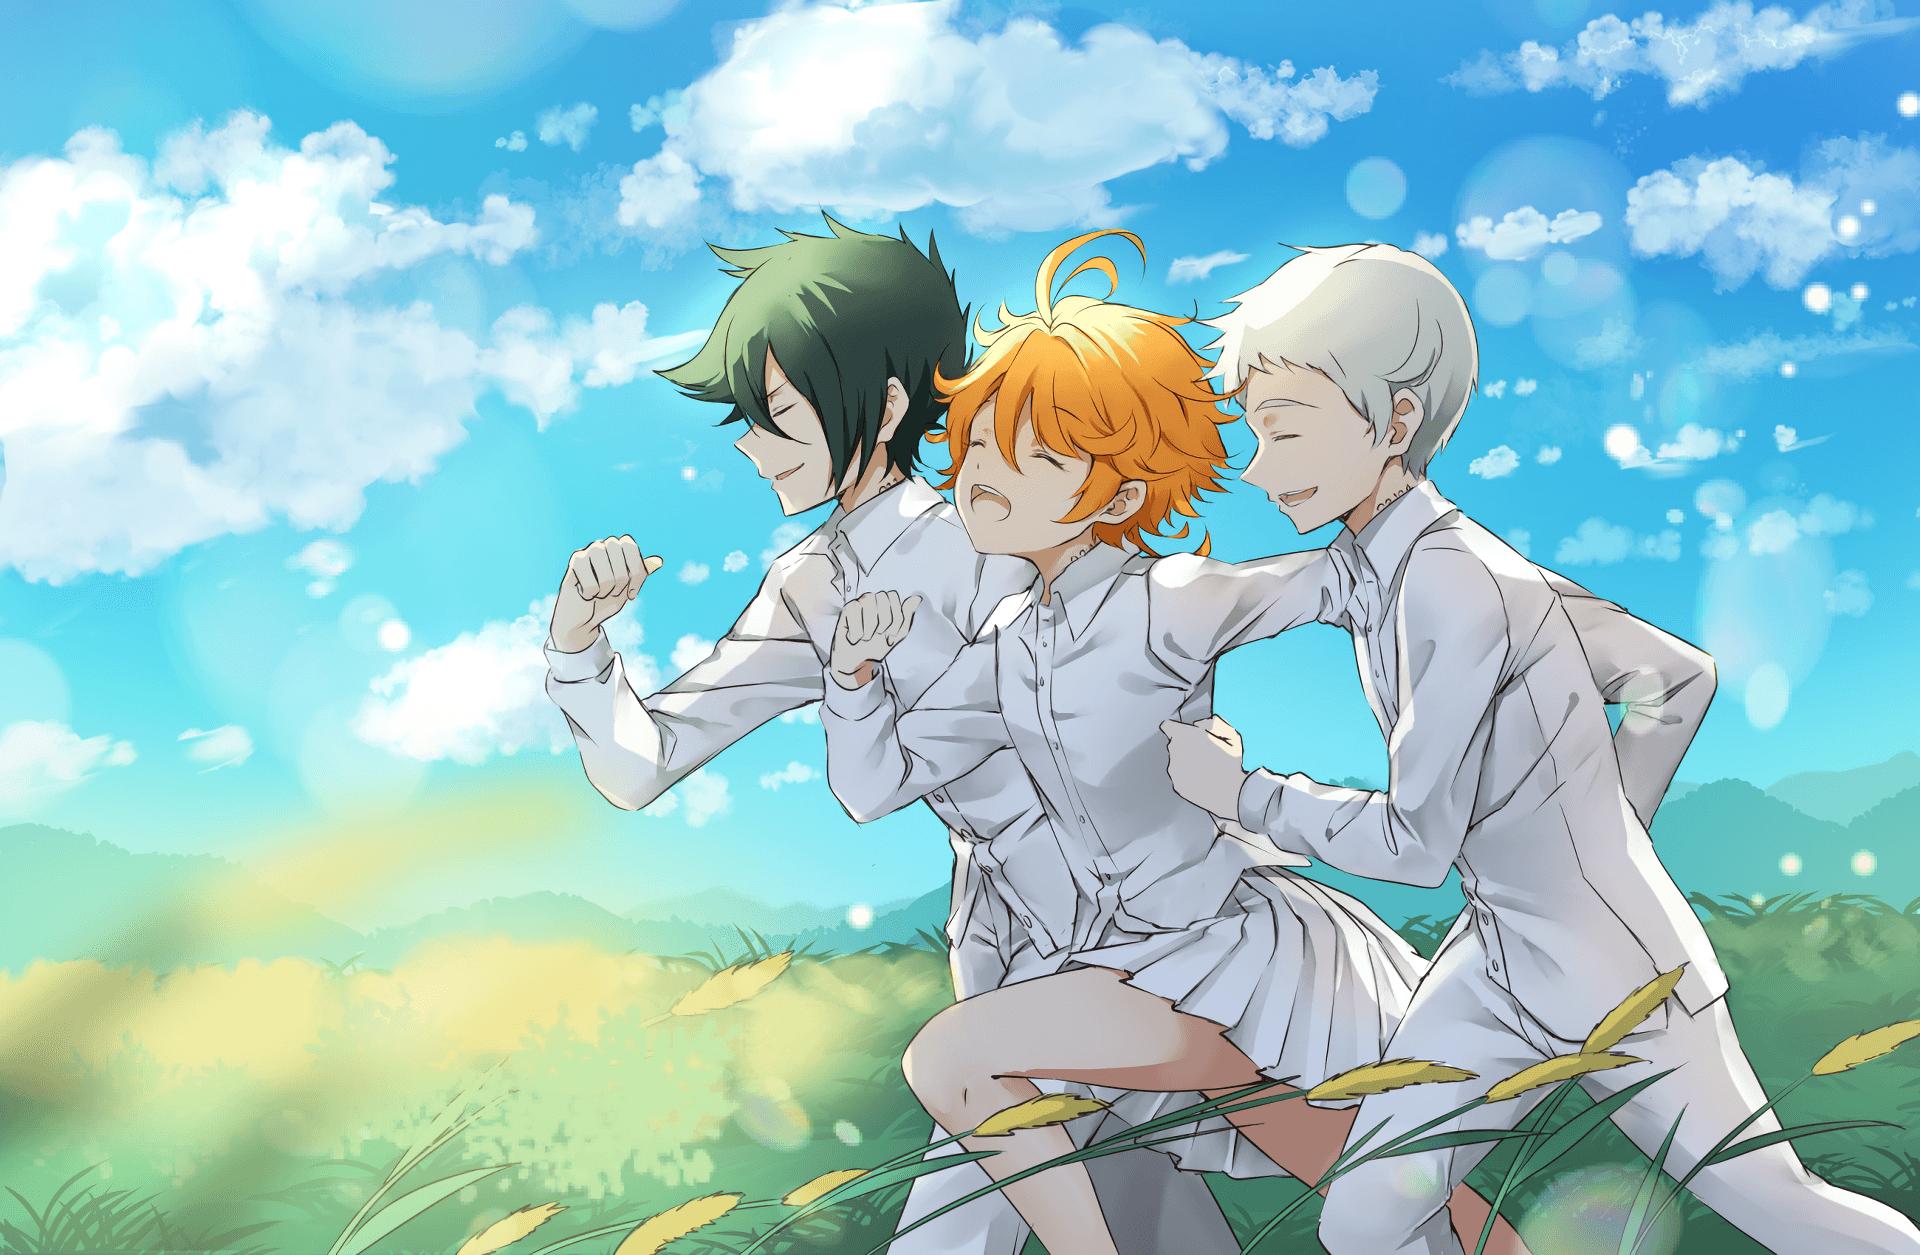 The Promised Neverland Wallpapers For Free, The Promised Neverland, Anime